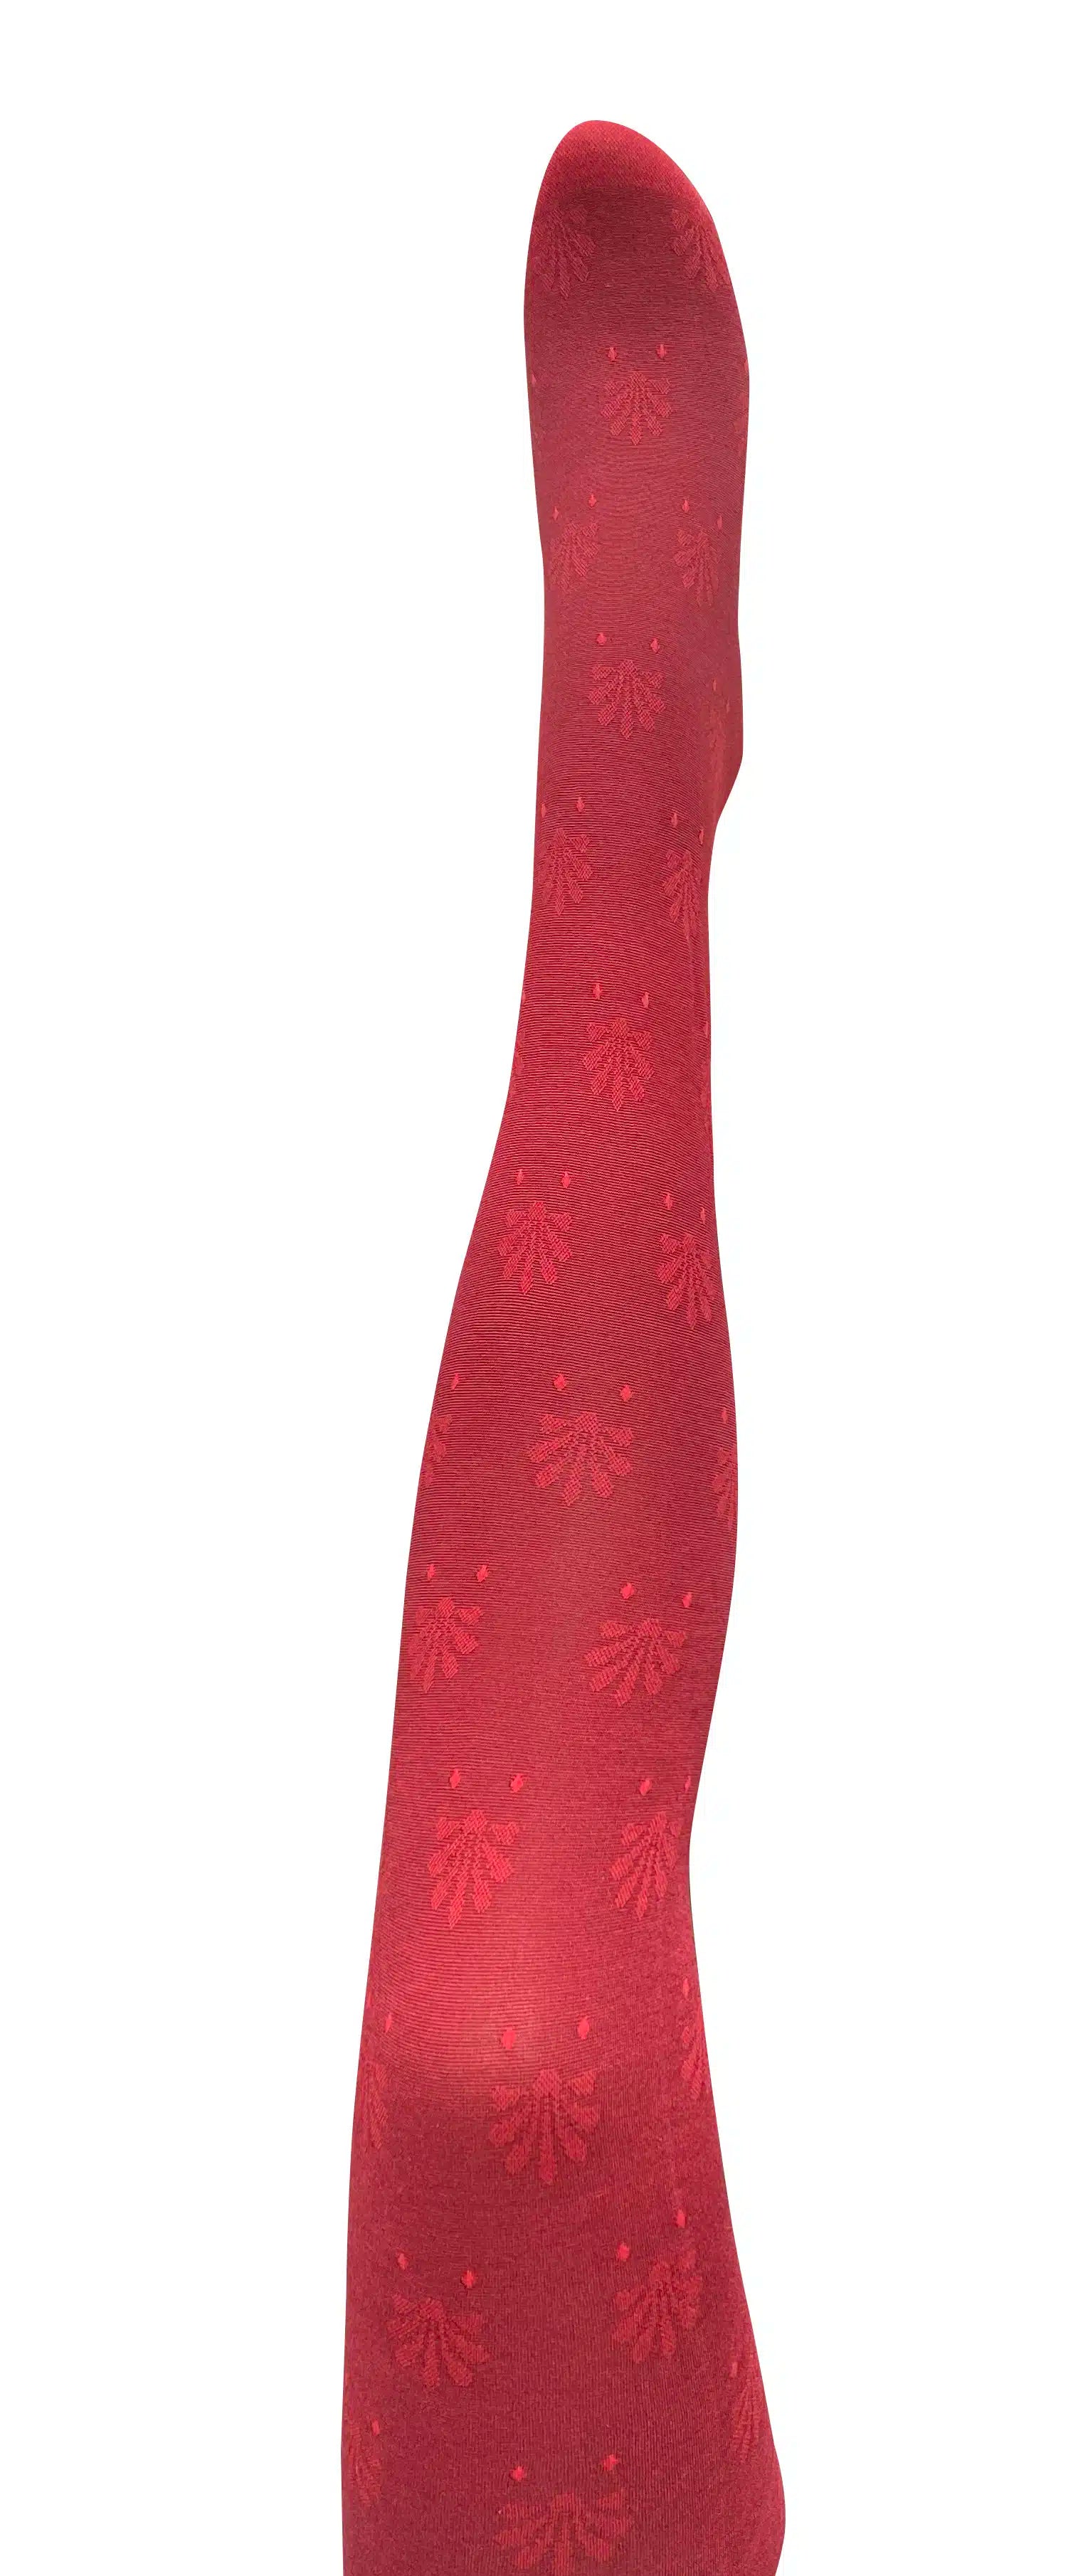 TIGHTOLOGY - Cotton Tights - Fleur Red